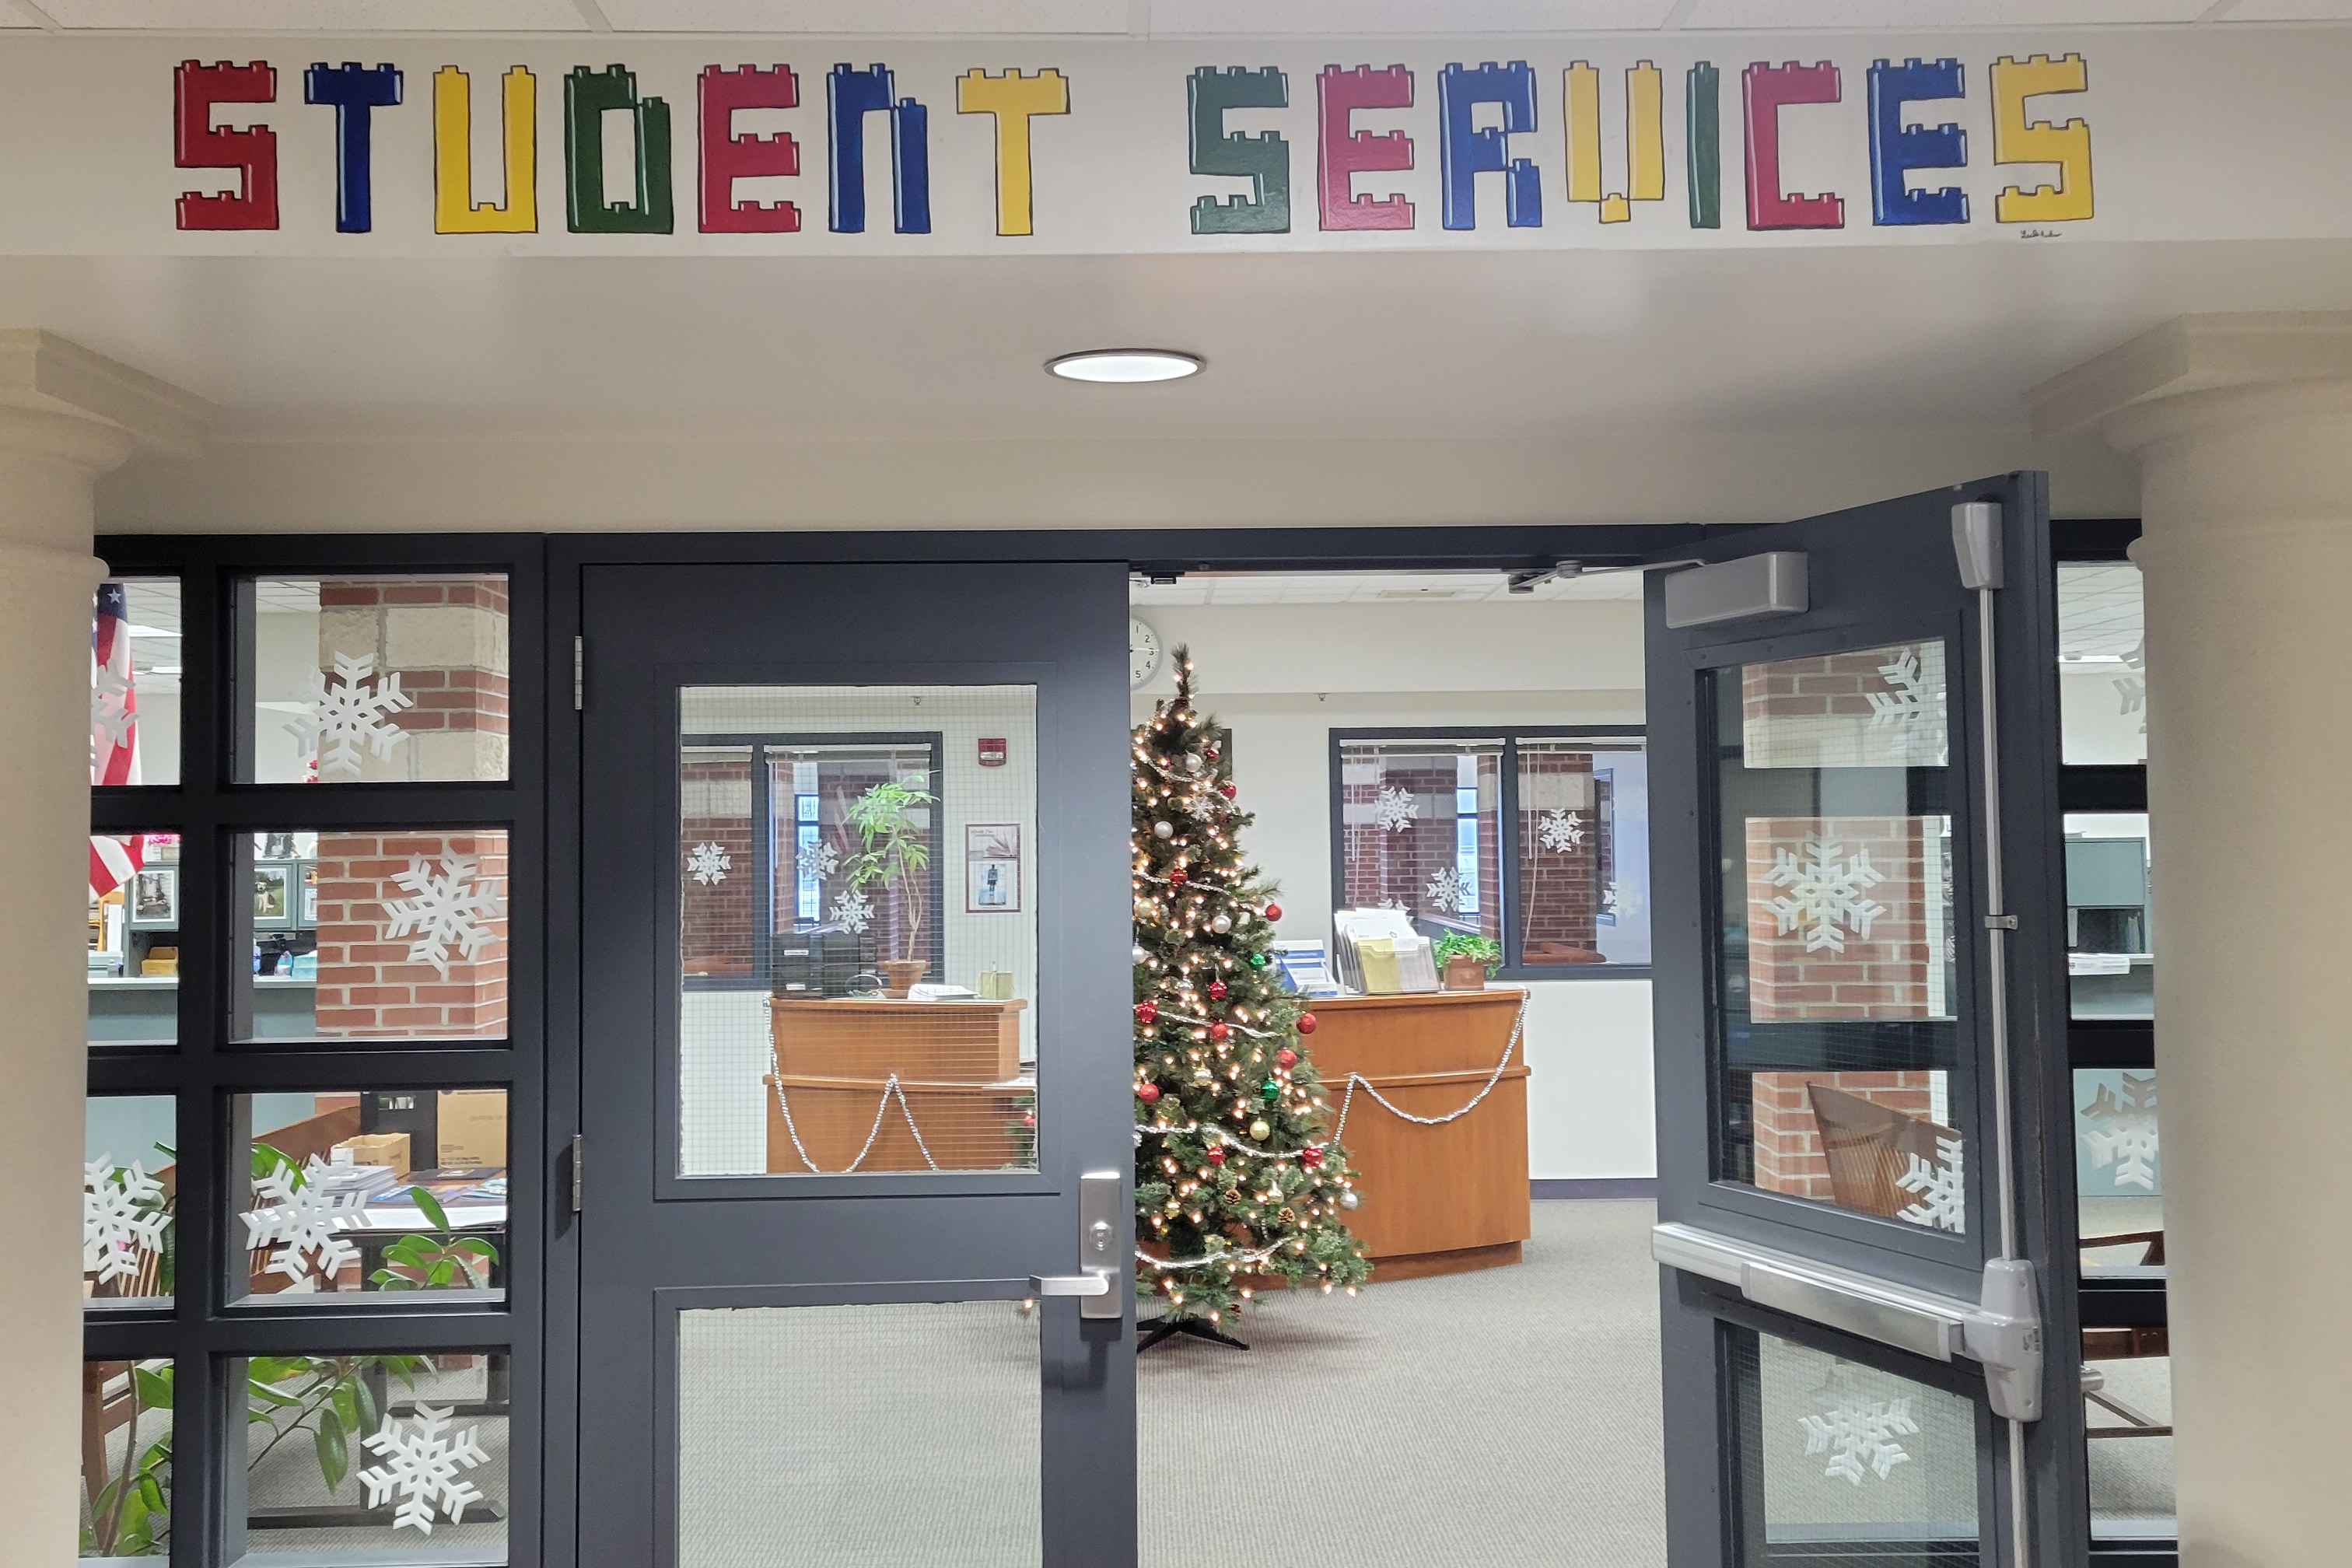 Entrance to Student Services